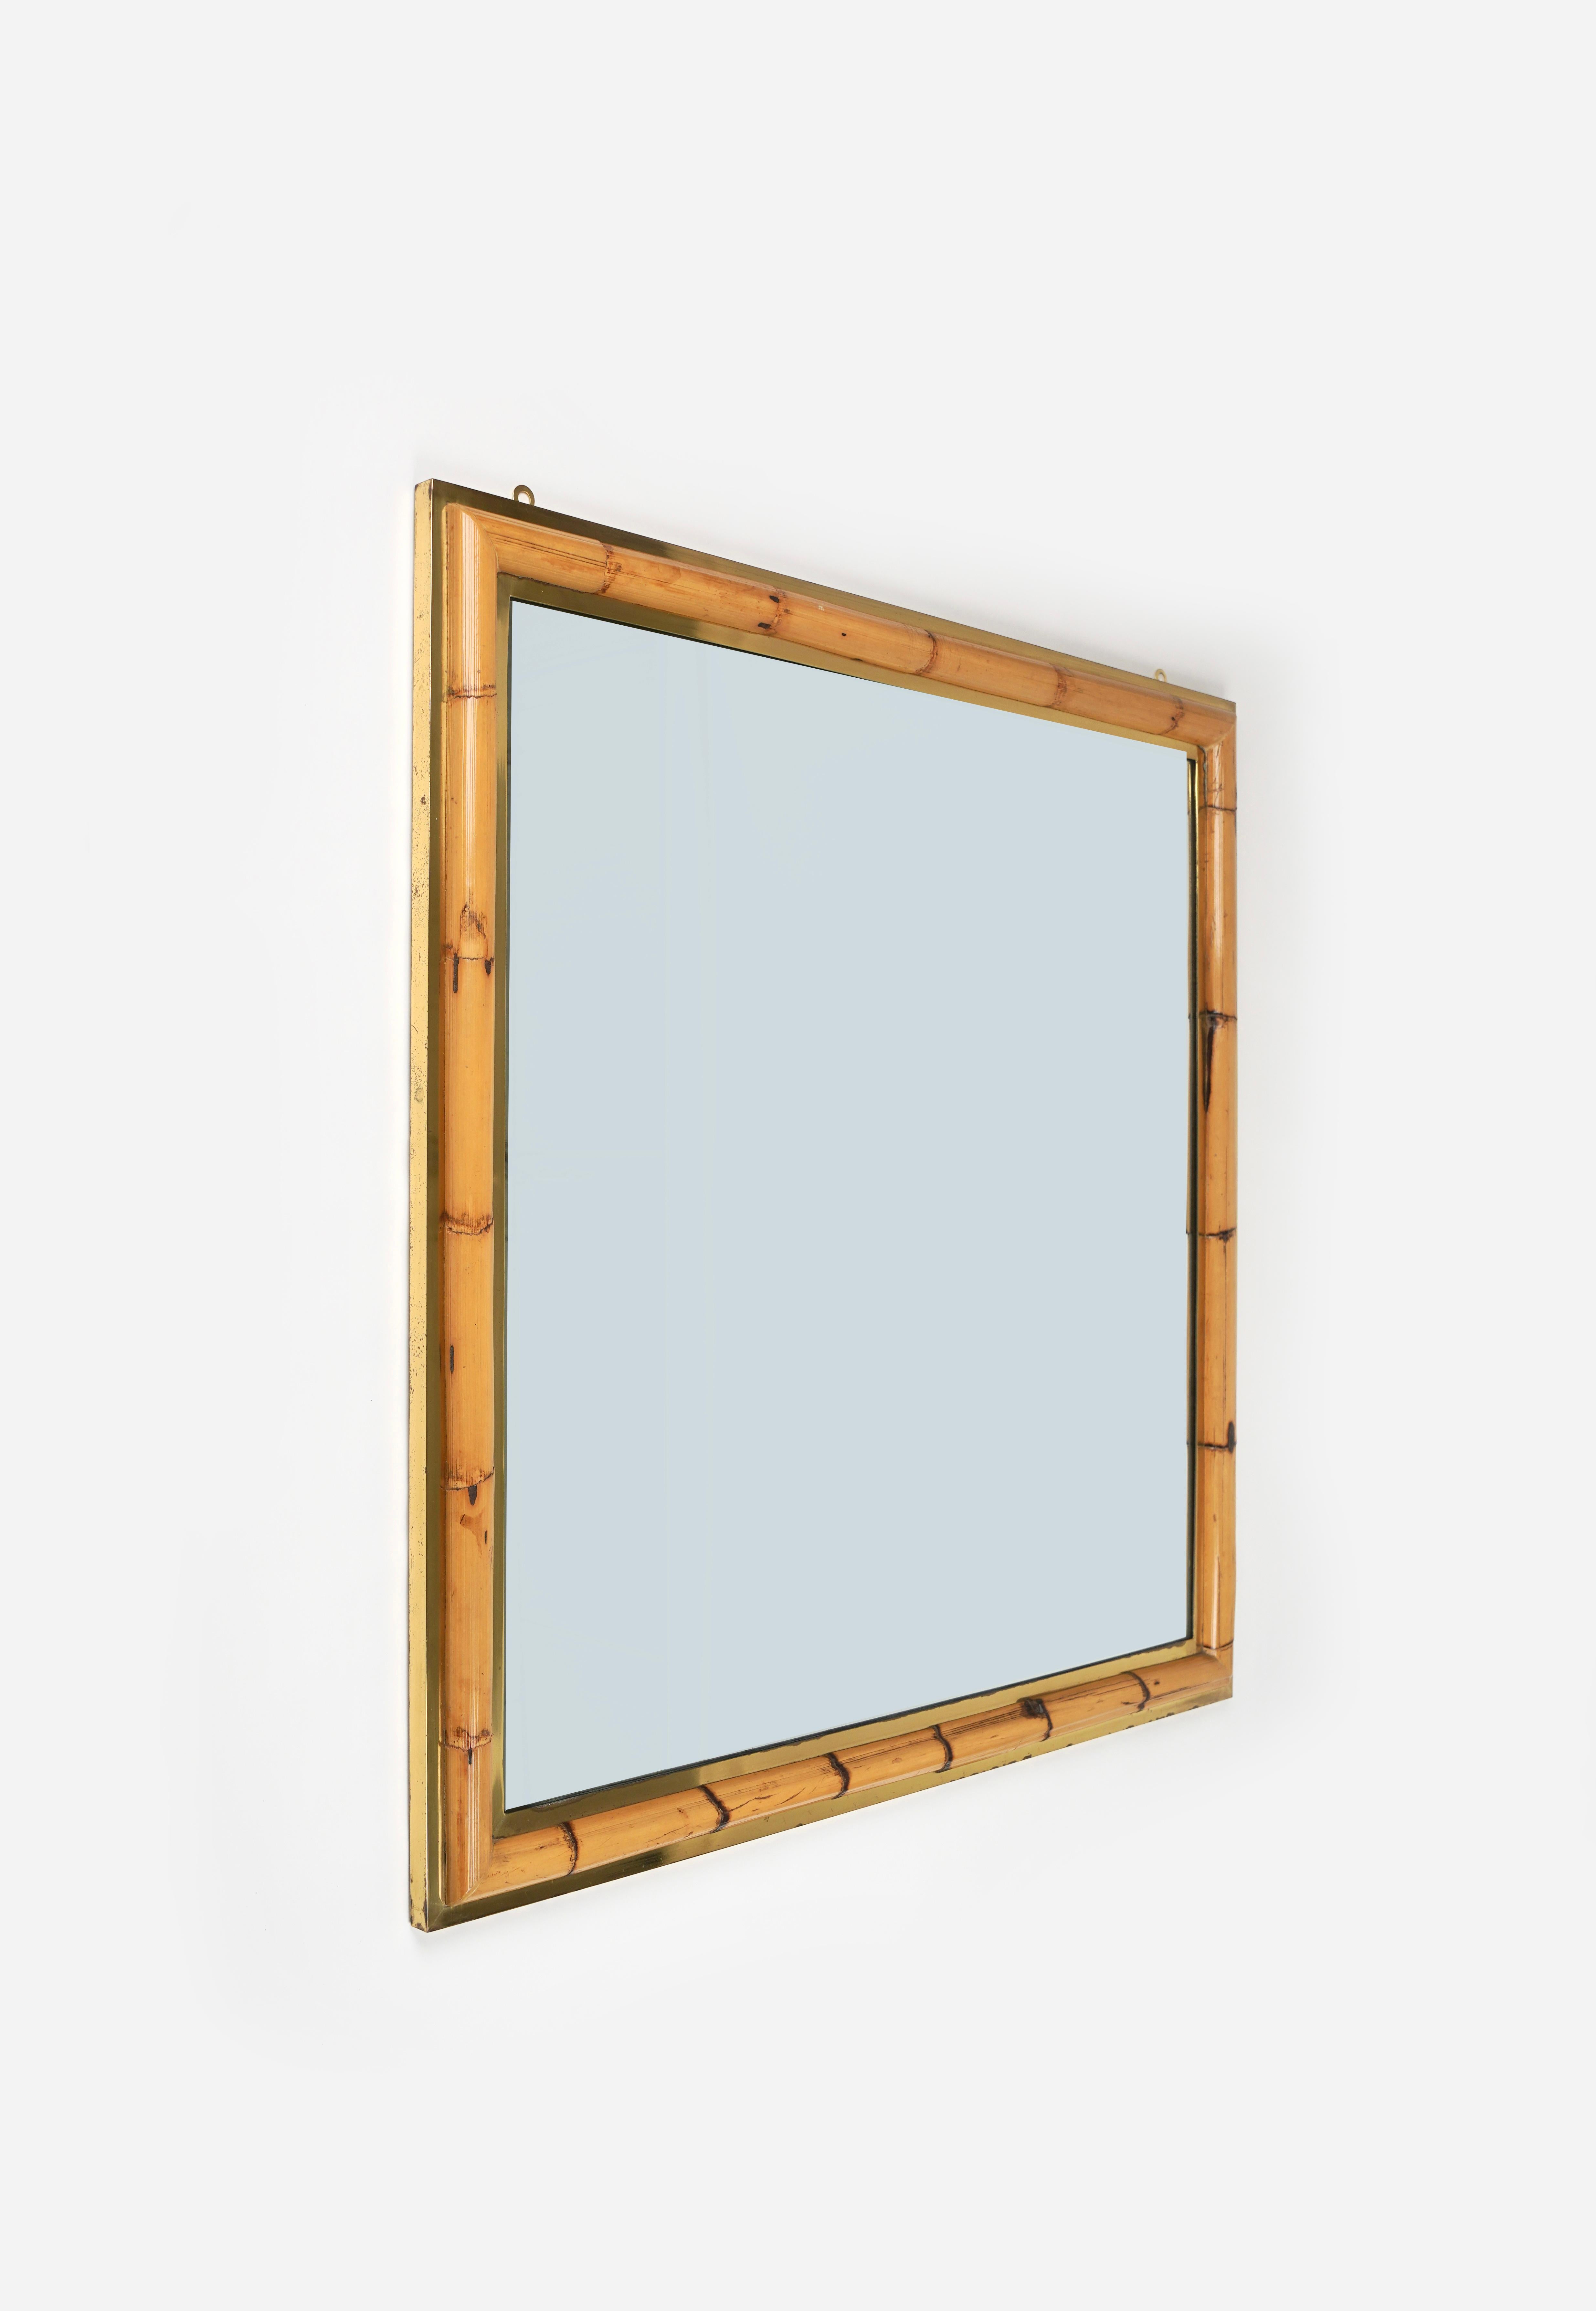 Gorgeous midcentury squared wall mirror in brass and bamboo in the style of Gabriella Crespi.

Made in Italy in the 1970s.